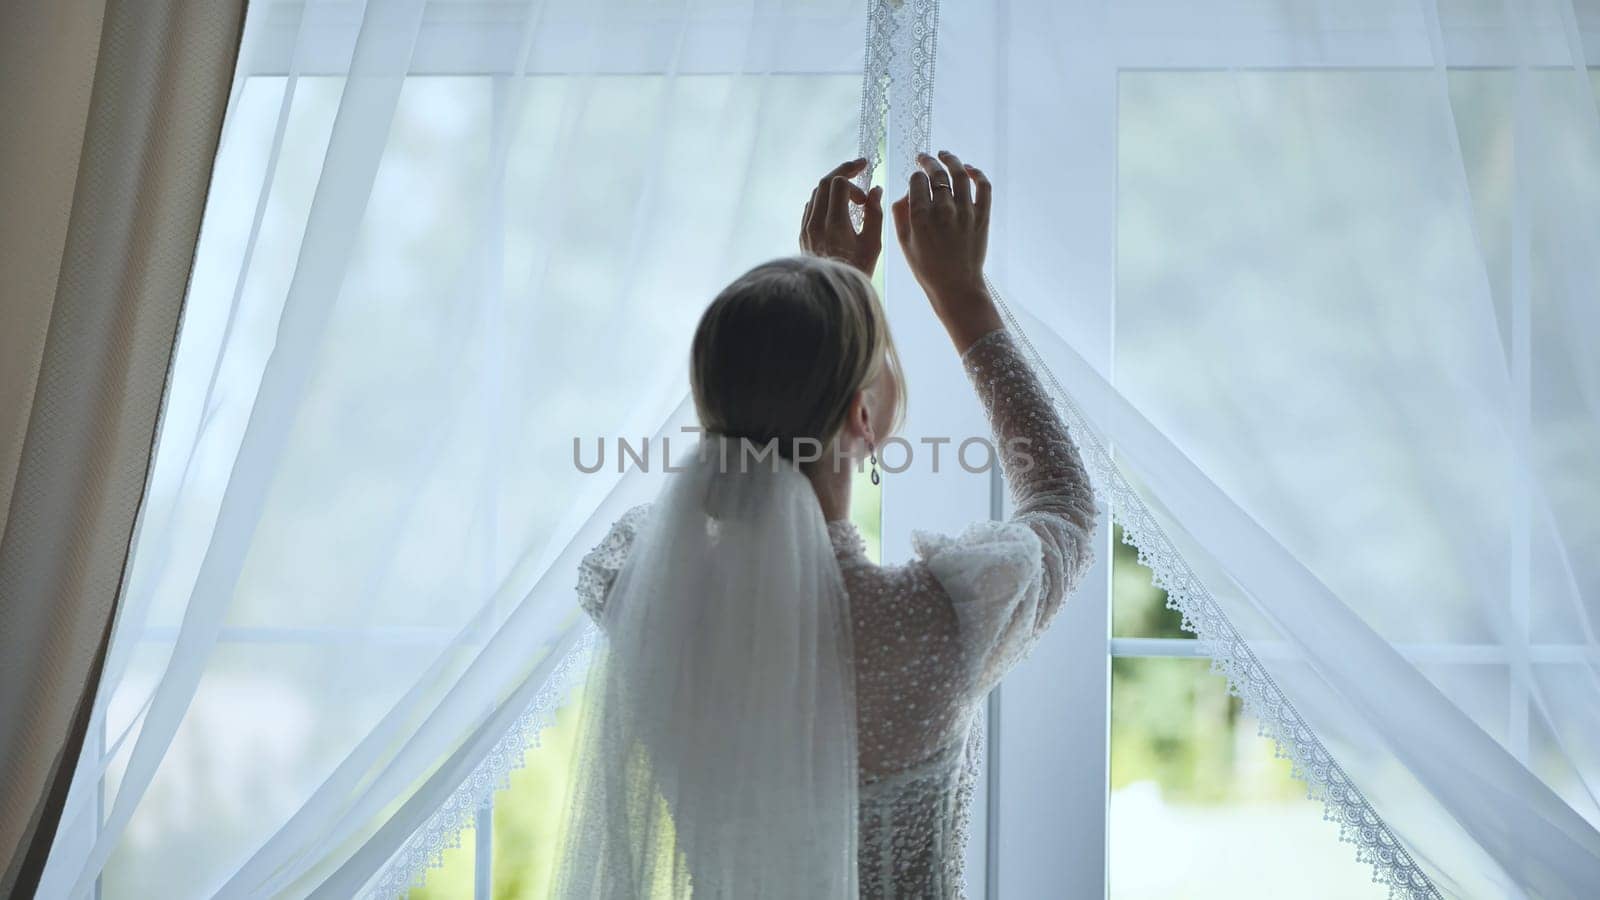 The bride adjusts the curtains at the window. by DovidPro